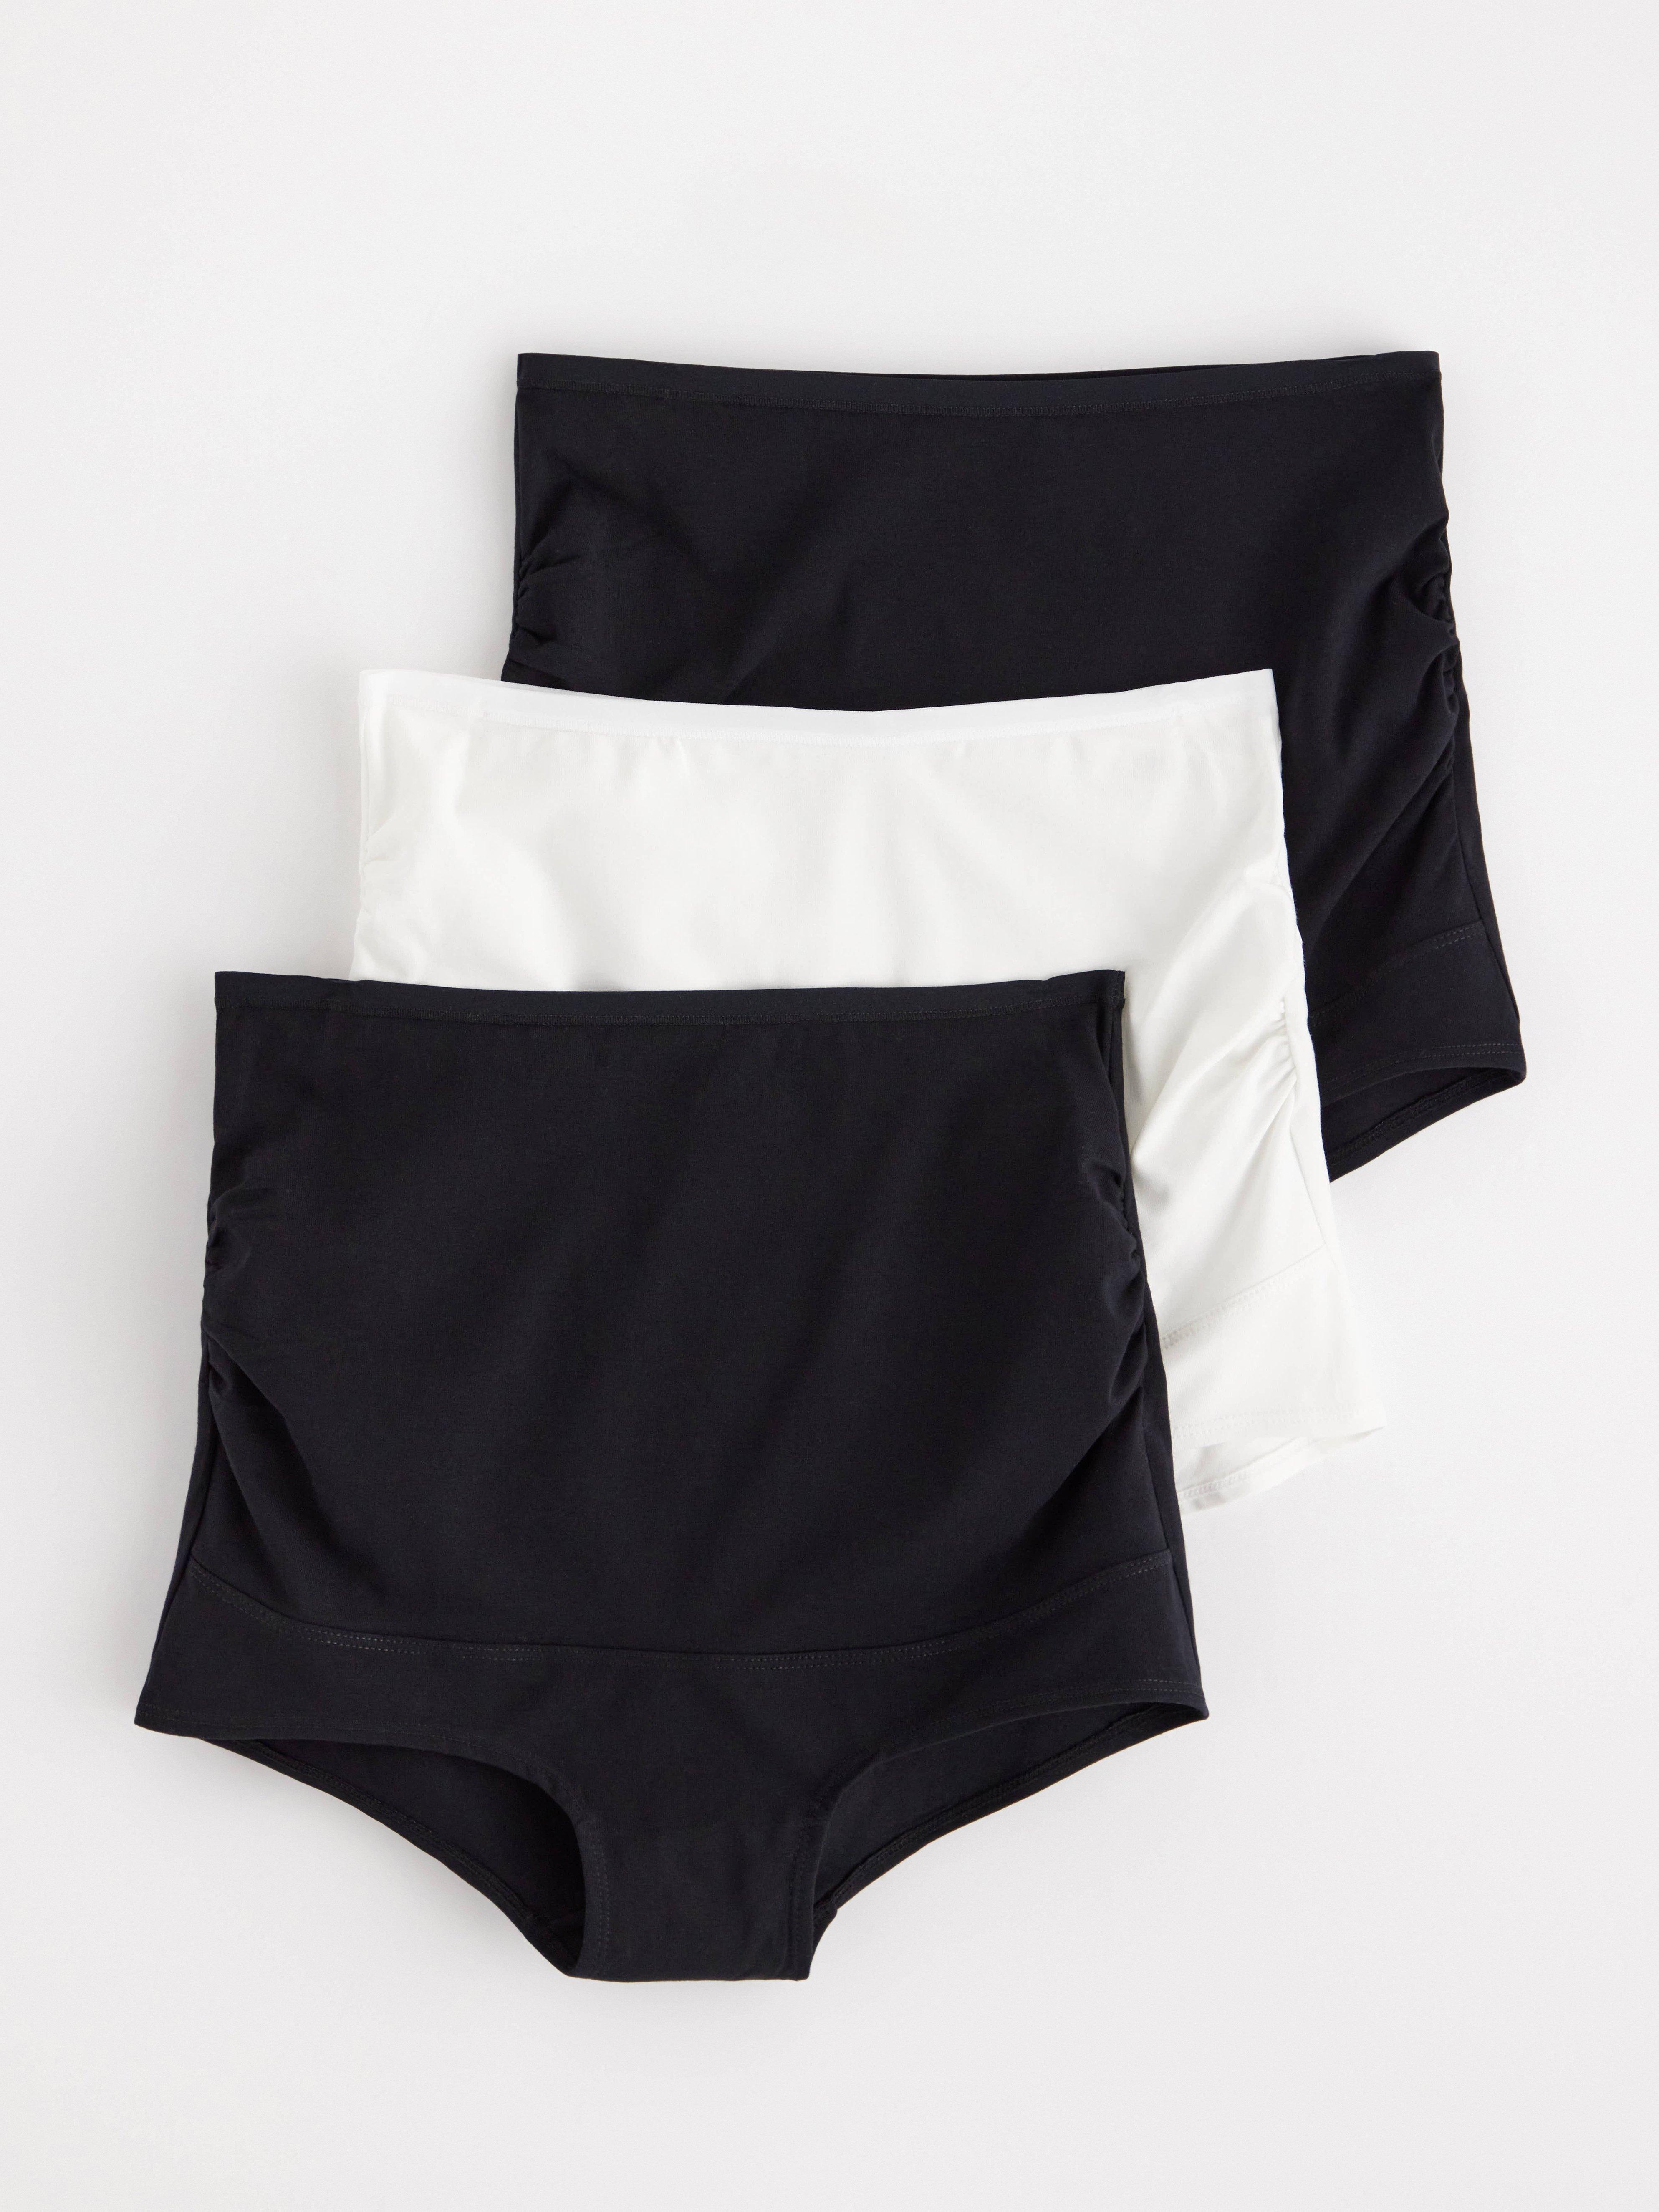 Post Maternity Briefs Black & White Twin Pack